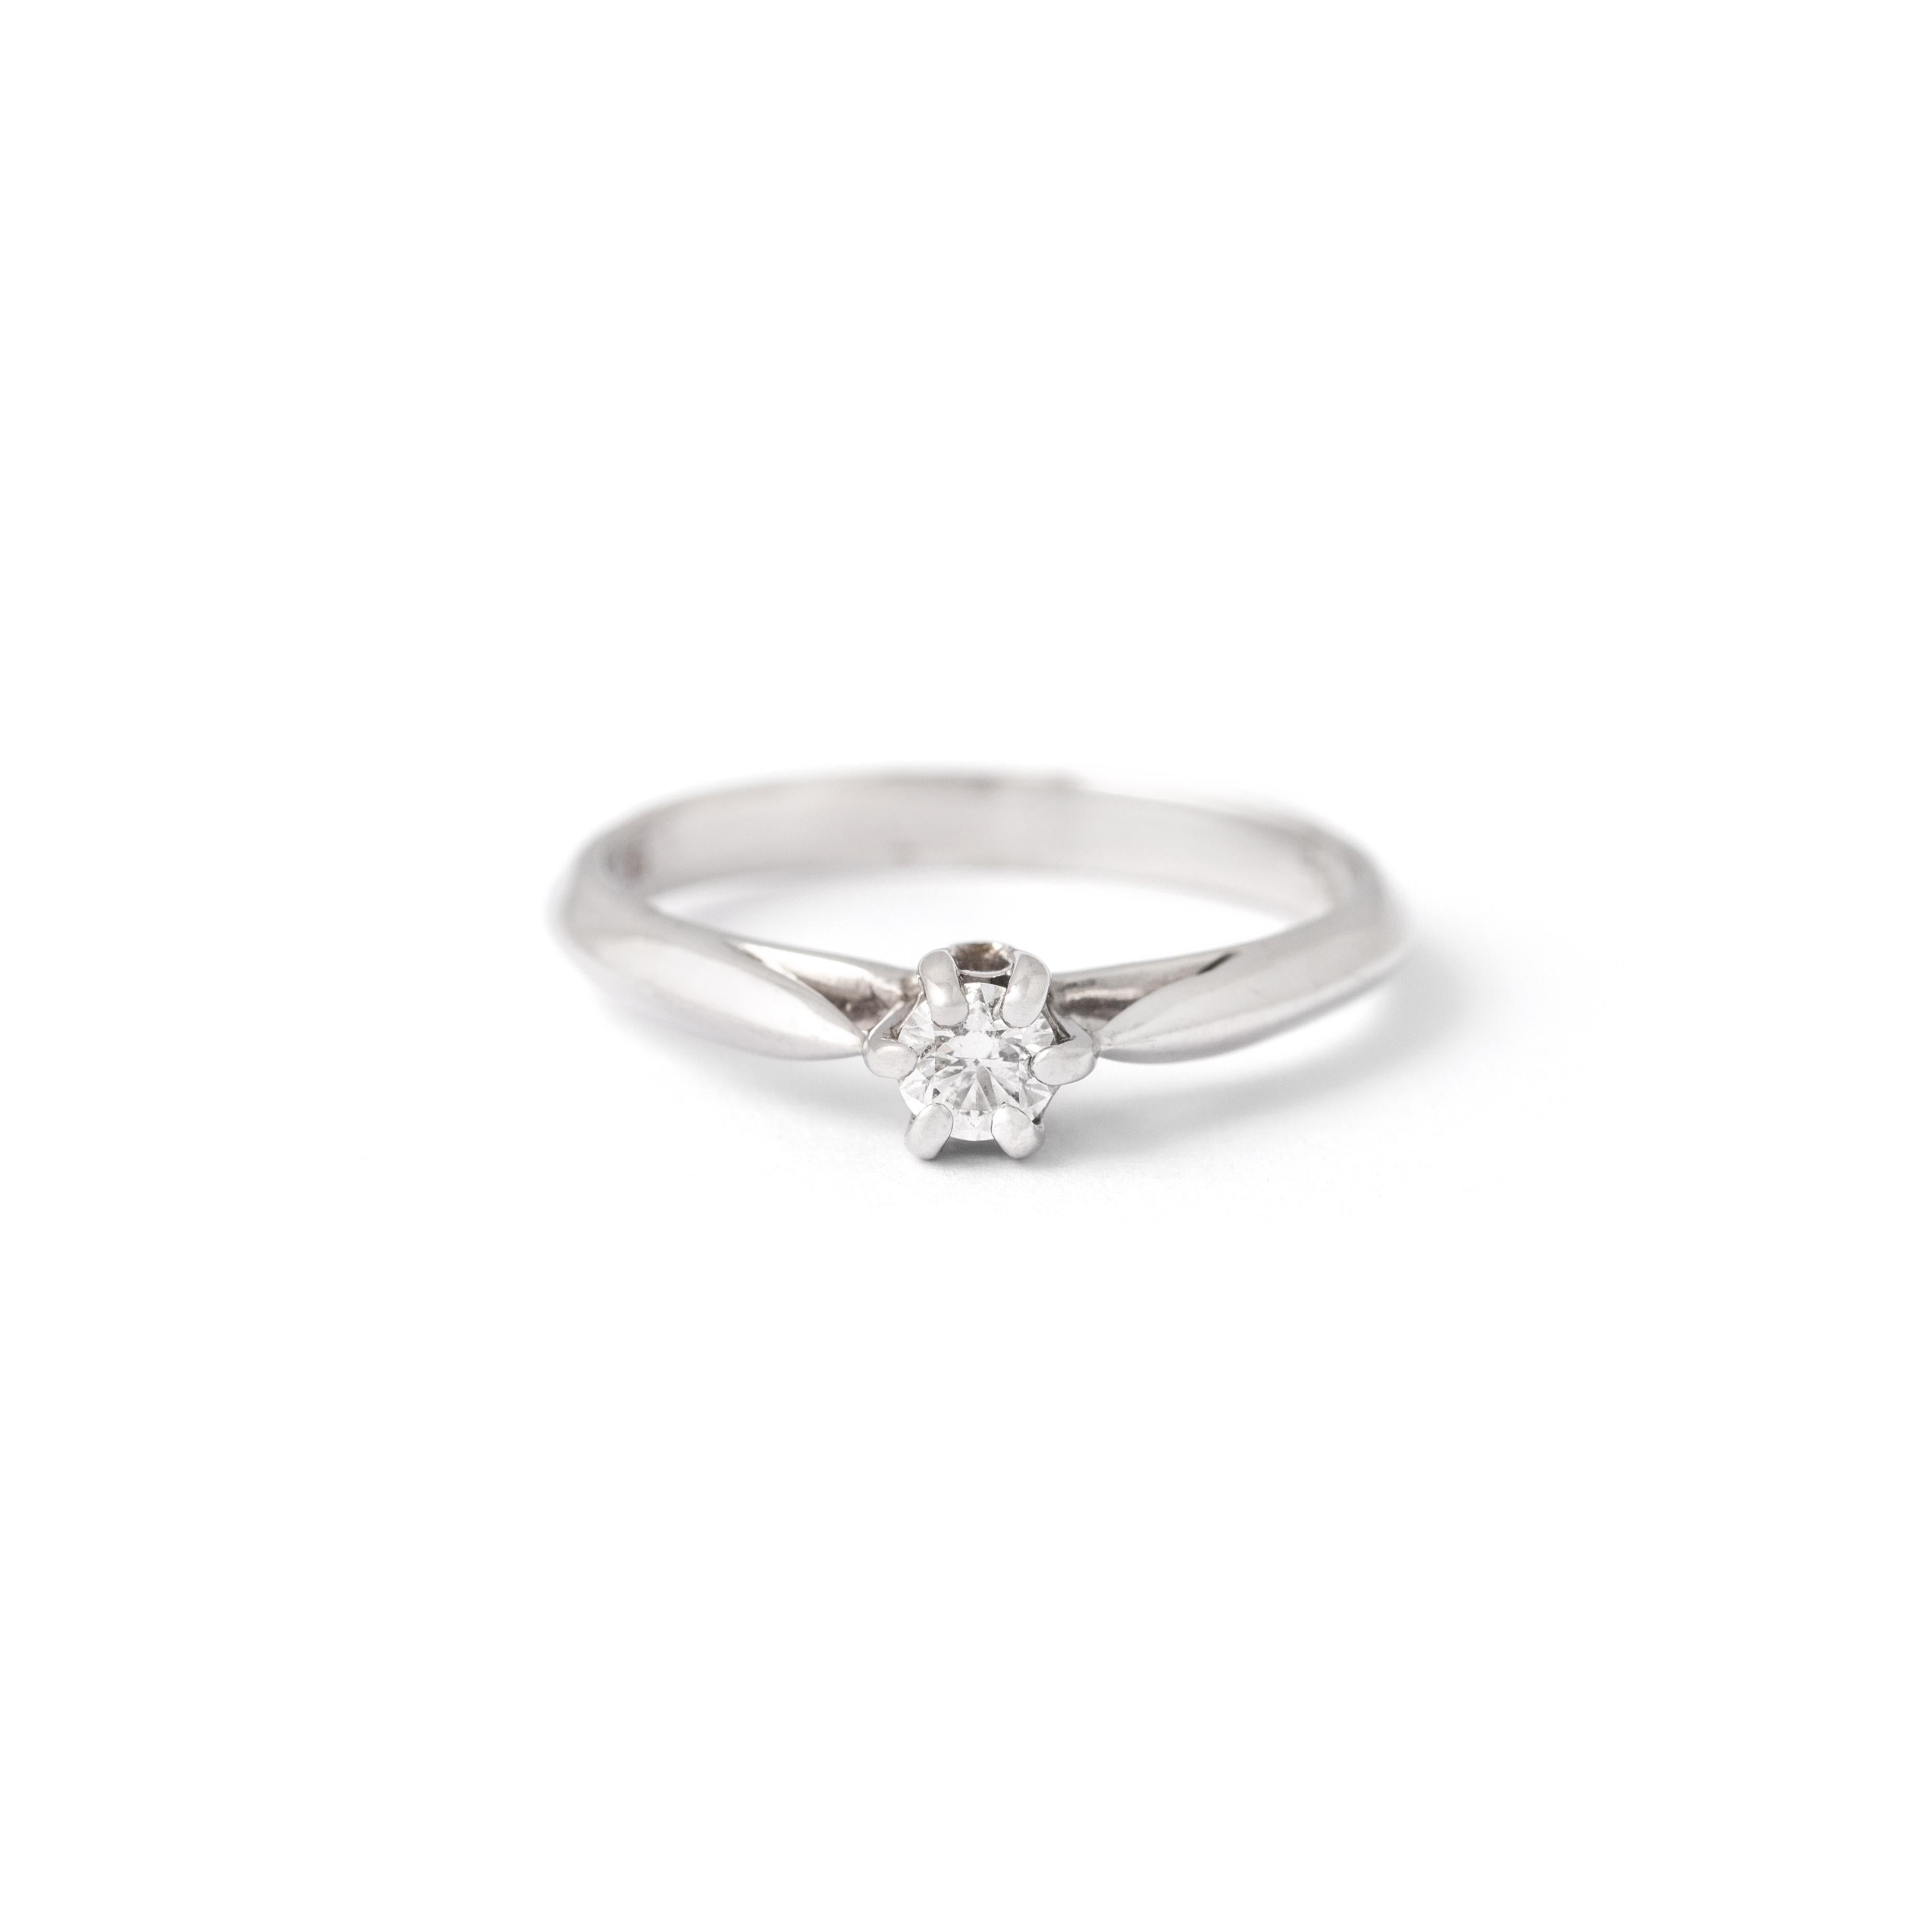 Diamond White Gold 18K Ring
Centered by a round cut diamond of 0,15 carat estimated G color and VVS2 clarity .
Size: 51
Total gross weight; 2.53 grams.